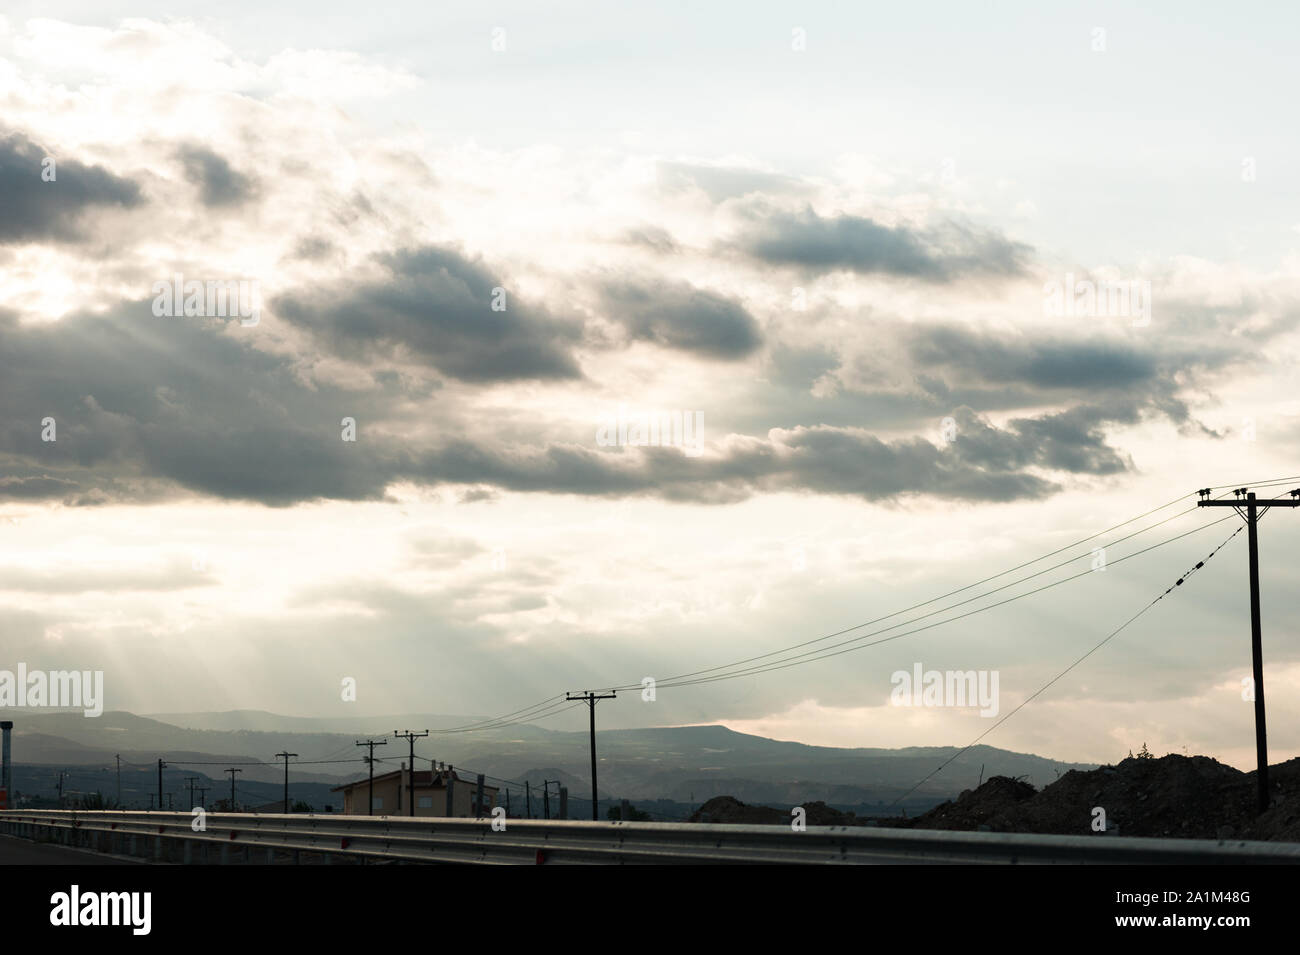 landscape frame, cloudy landscape, blue yellow green and orange sky with mountains Stock Photo